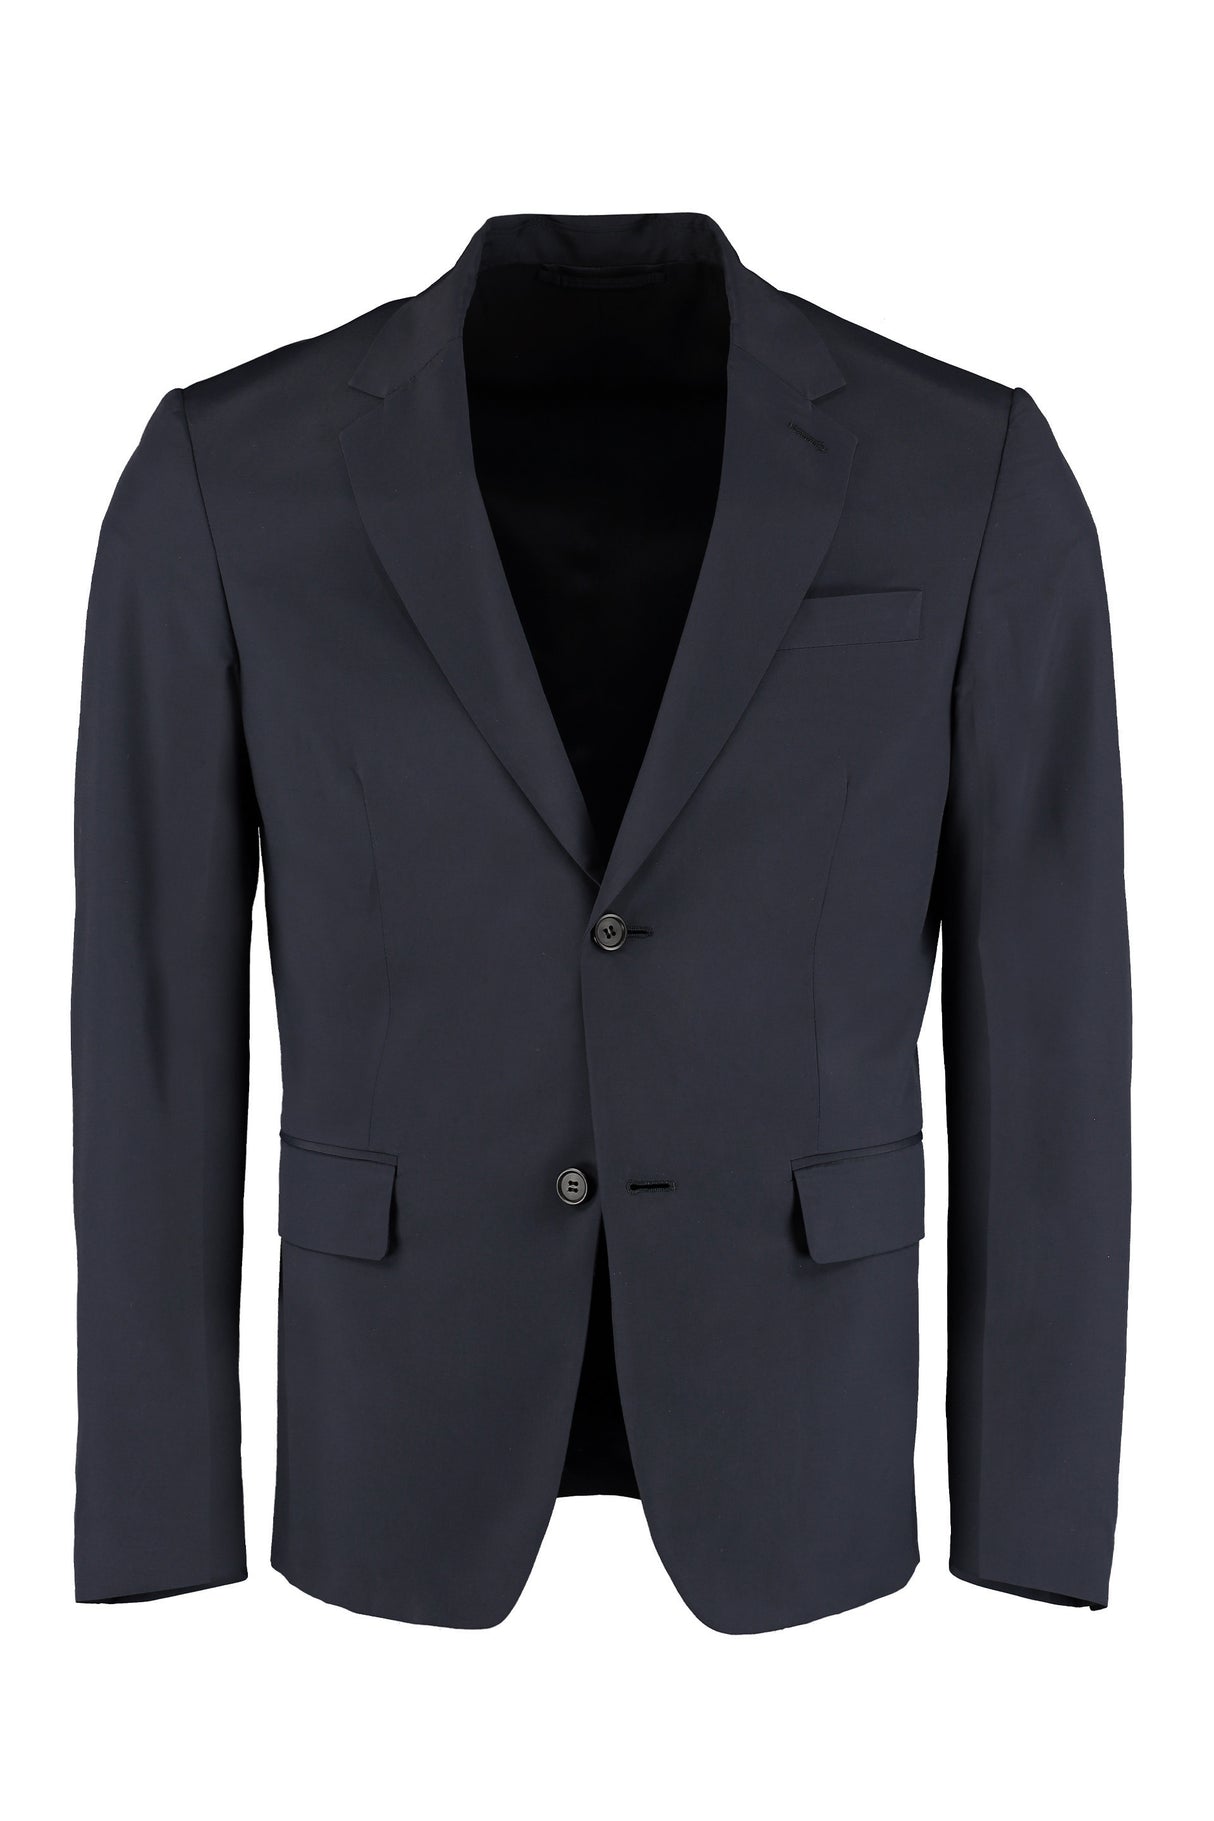 Blue Wool Single-Breasted Jacket - SS22 Collection